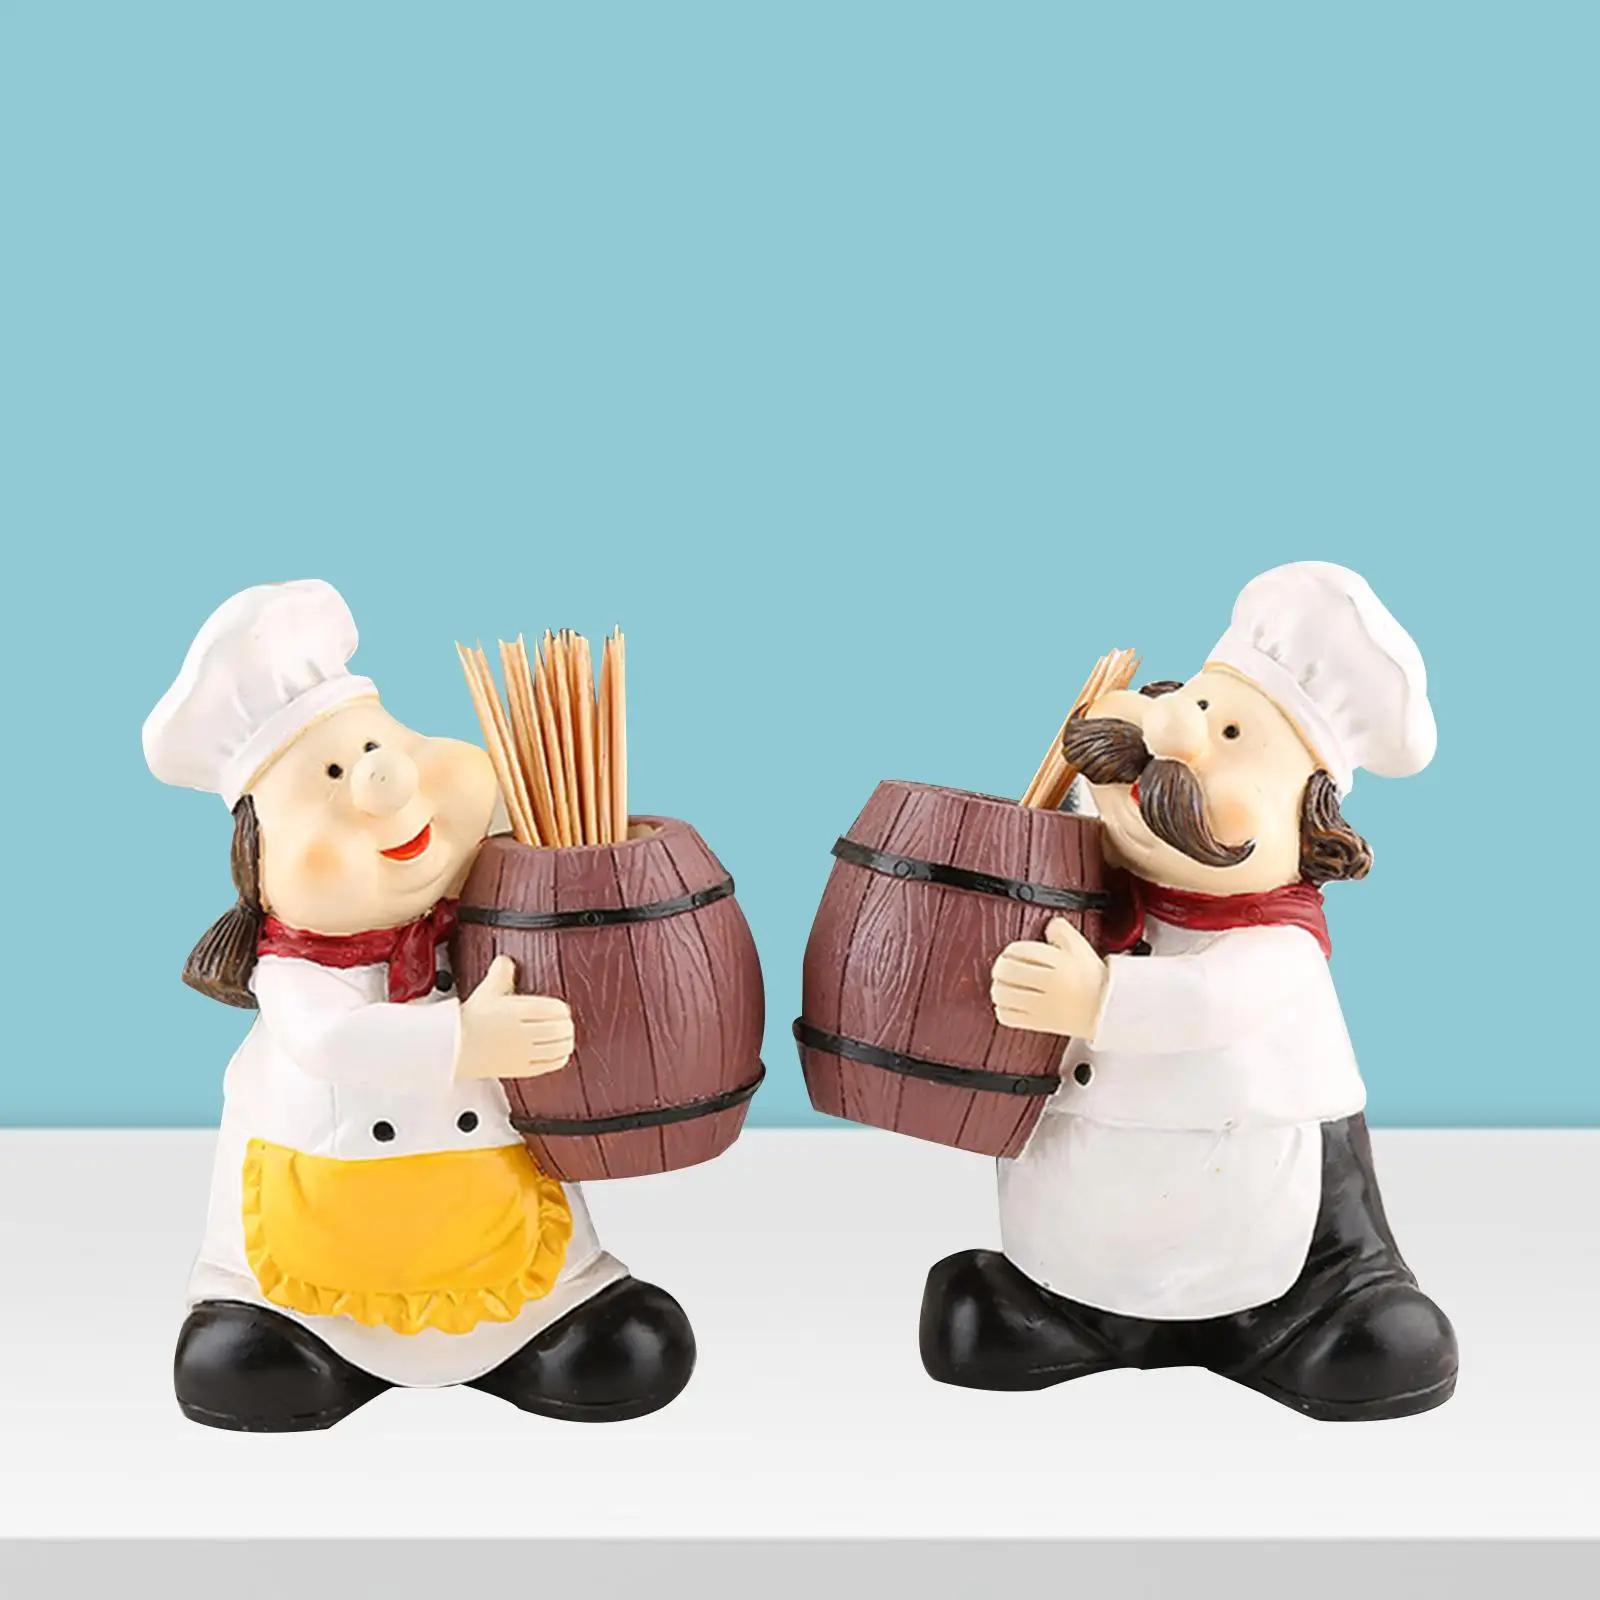 Nordic Chef Figurines Toothpick Holder Ornaments for Restaurant Decor